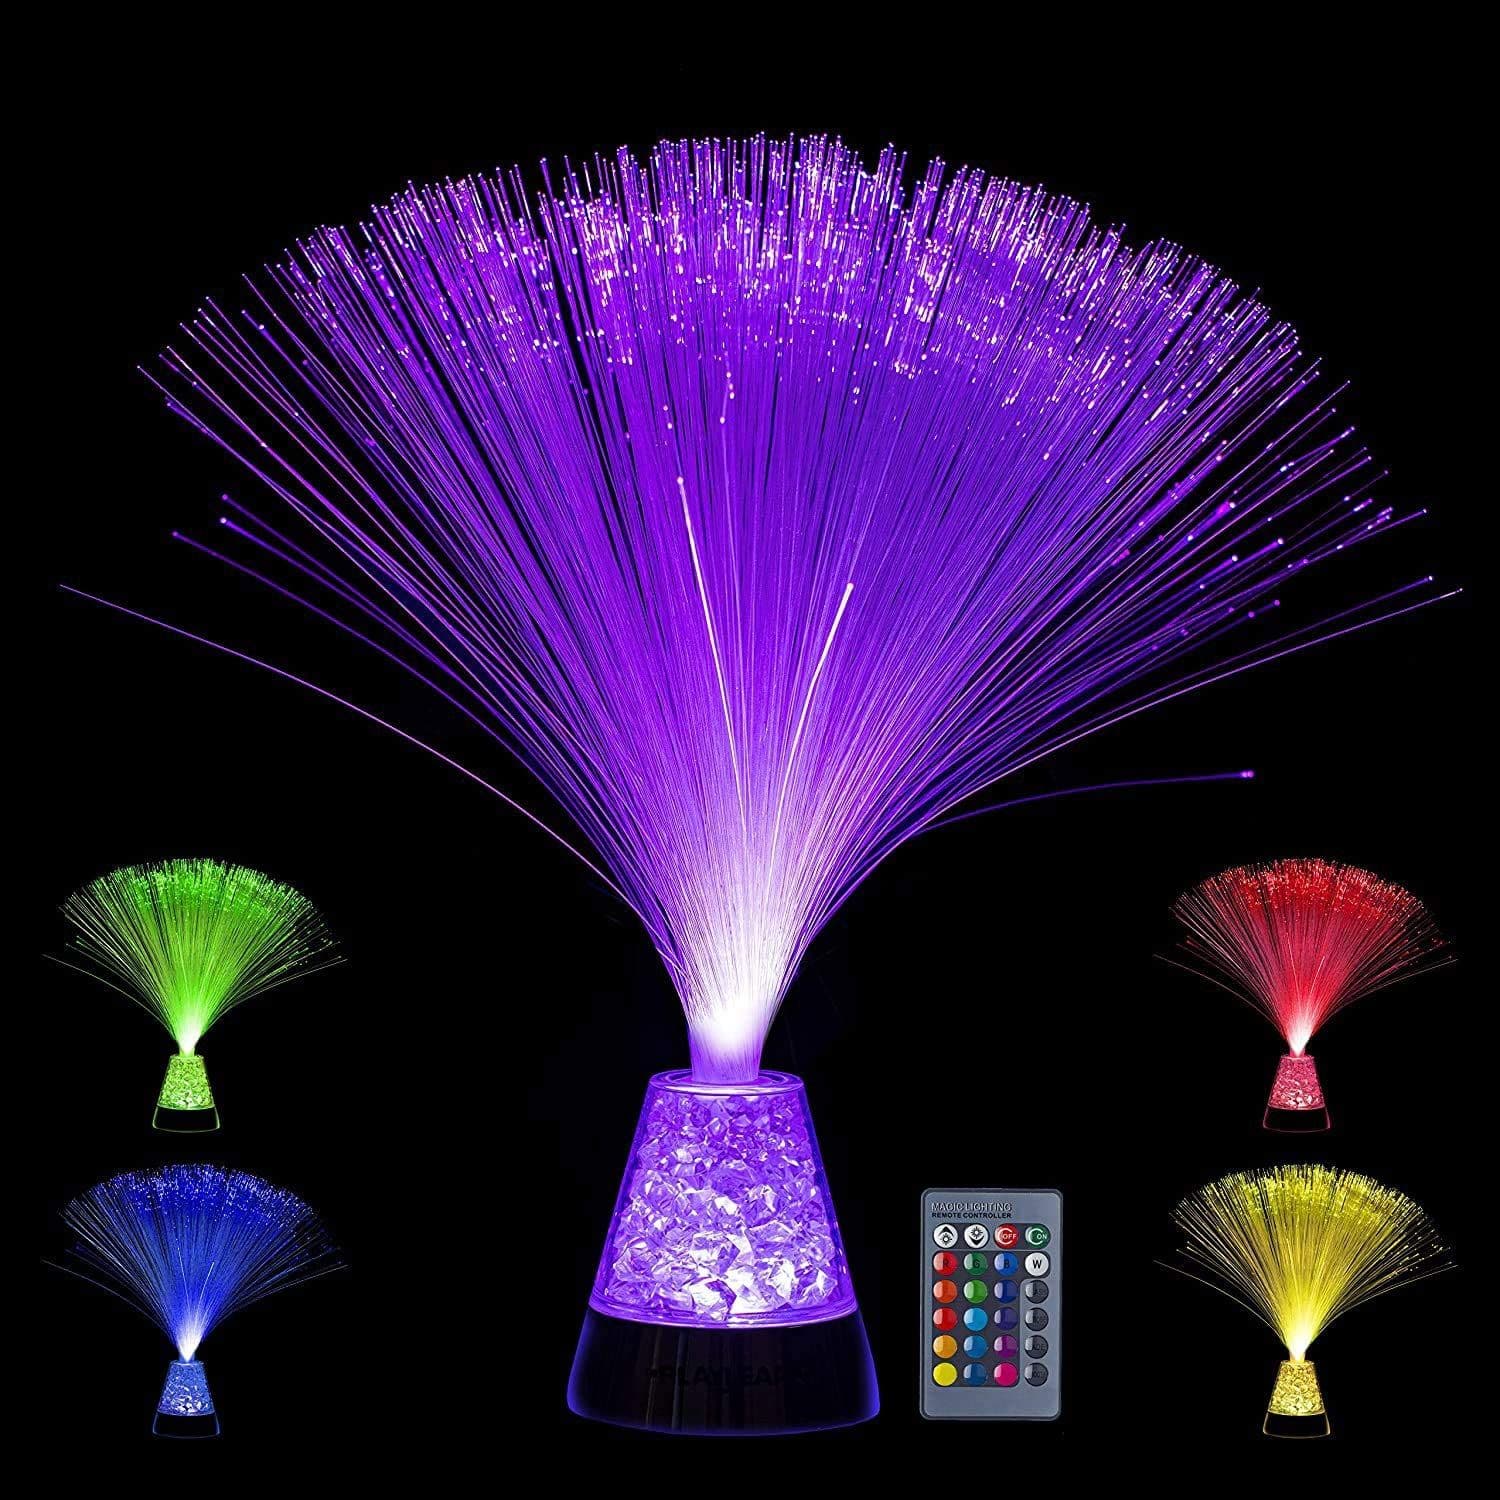 Fibre Optic Lamp Benefits for People with Additional Needs/ Autism ...